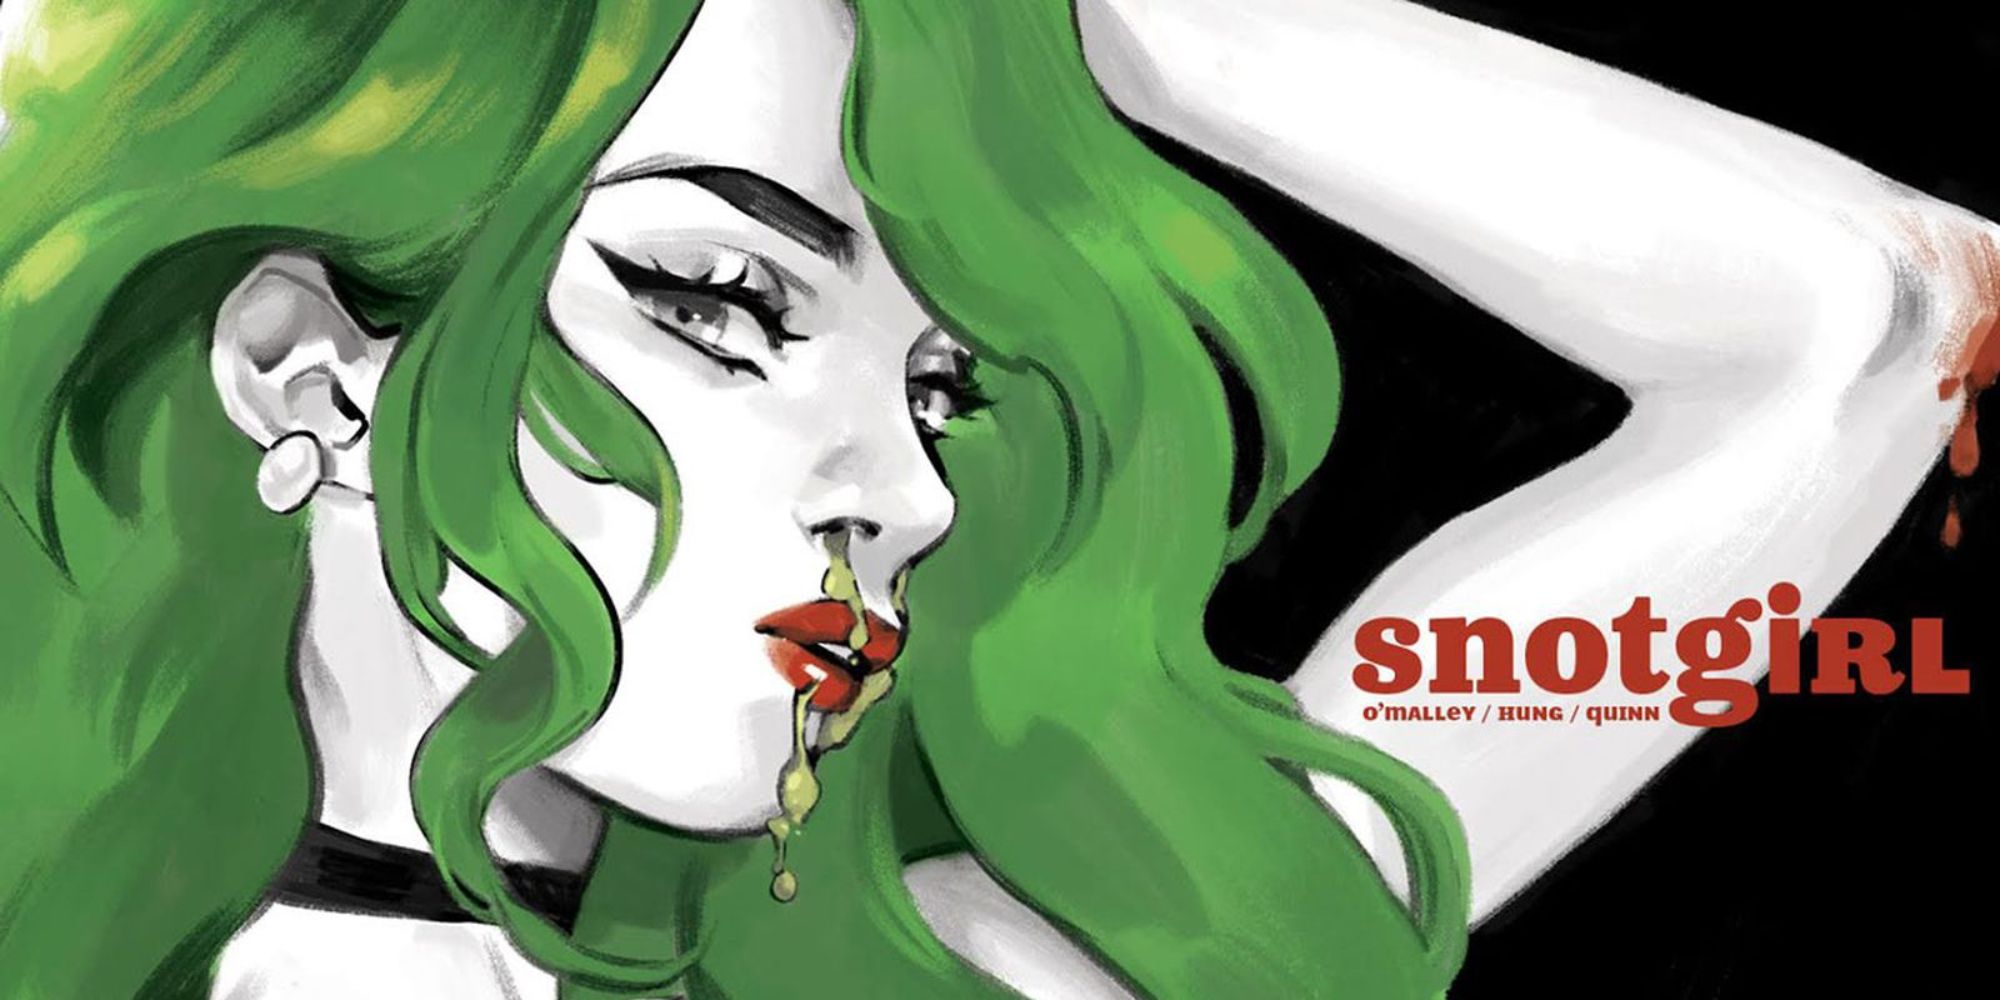 a promotional image for the comic book Snotgirl featuring its protagonist Lottie running her hand through her green hair as snot runs down her face